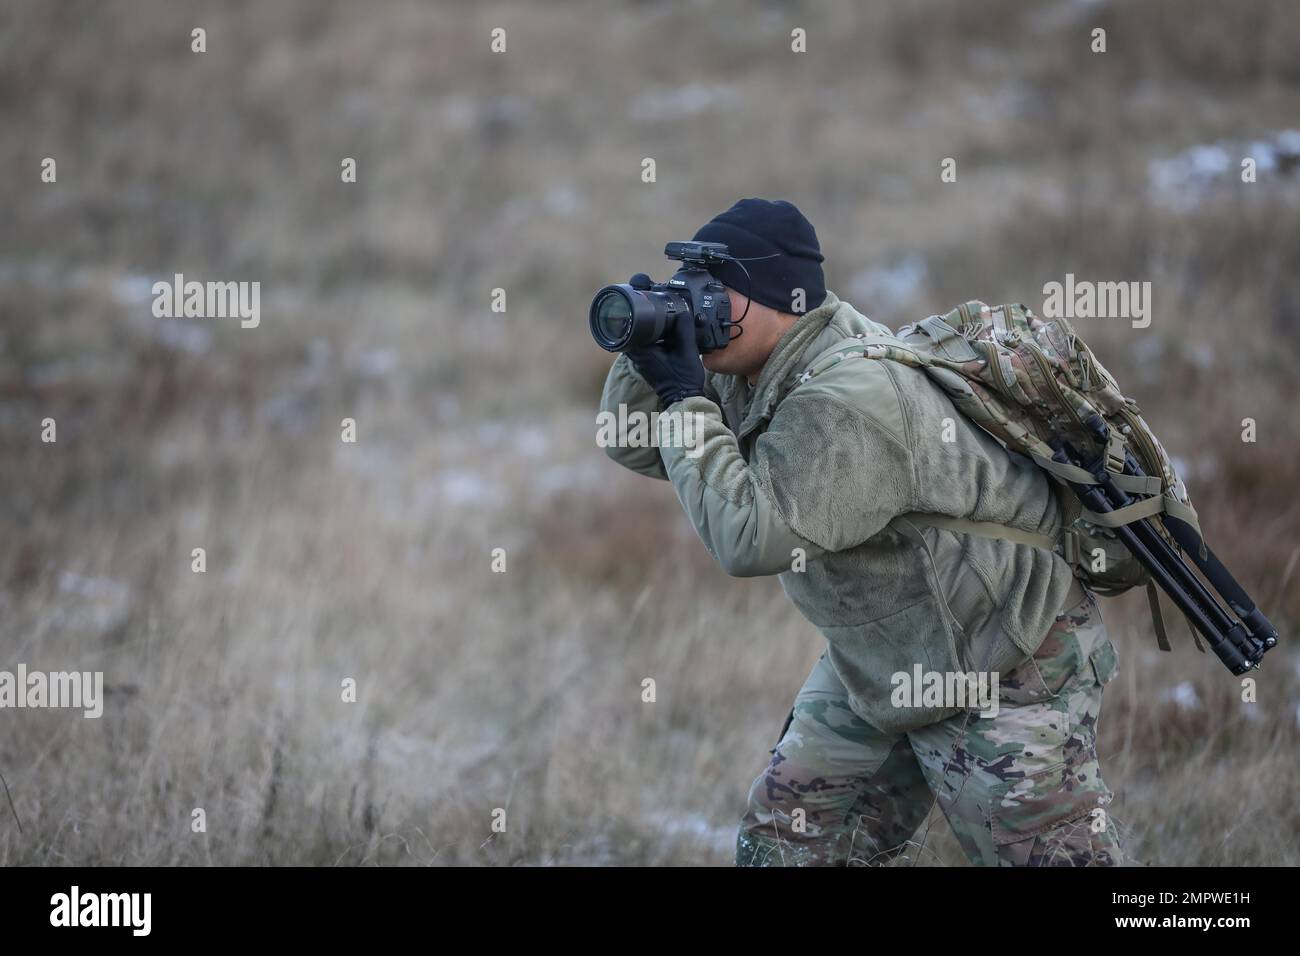 U.S. Army Sgt. Gavin Ching, a mass communication specialist assigned to 117th Mobile Public Affairs Department (117th MPAD), operationally controlled by the 1st Infantry Division (1 ID), takes photos of Soldiers during a live fire exercise rehearsal at Bemowo Piskie Training Area, Poland, Nov. 18, 2022. The 117th MPAD is among other units assigned to the 1 ID, proudly working alongside NATO allies and regional security partners to provide combat-credible forces to V Corps, America's forward deployed corps in Europe. Stock Photo